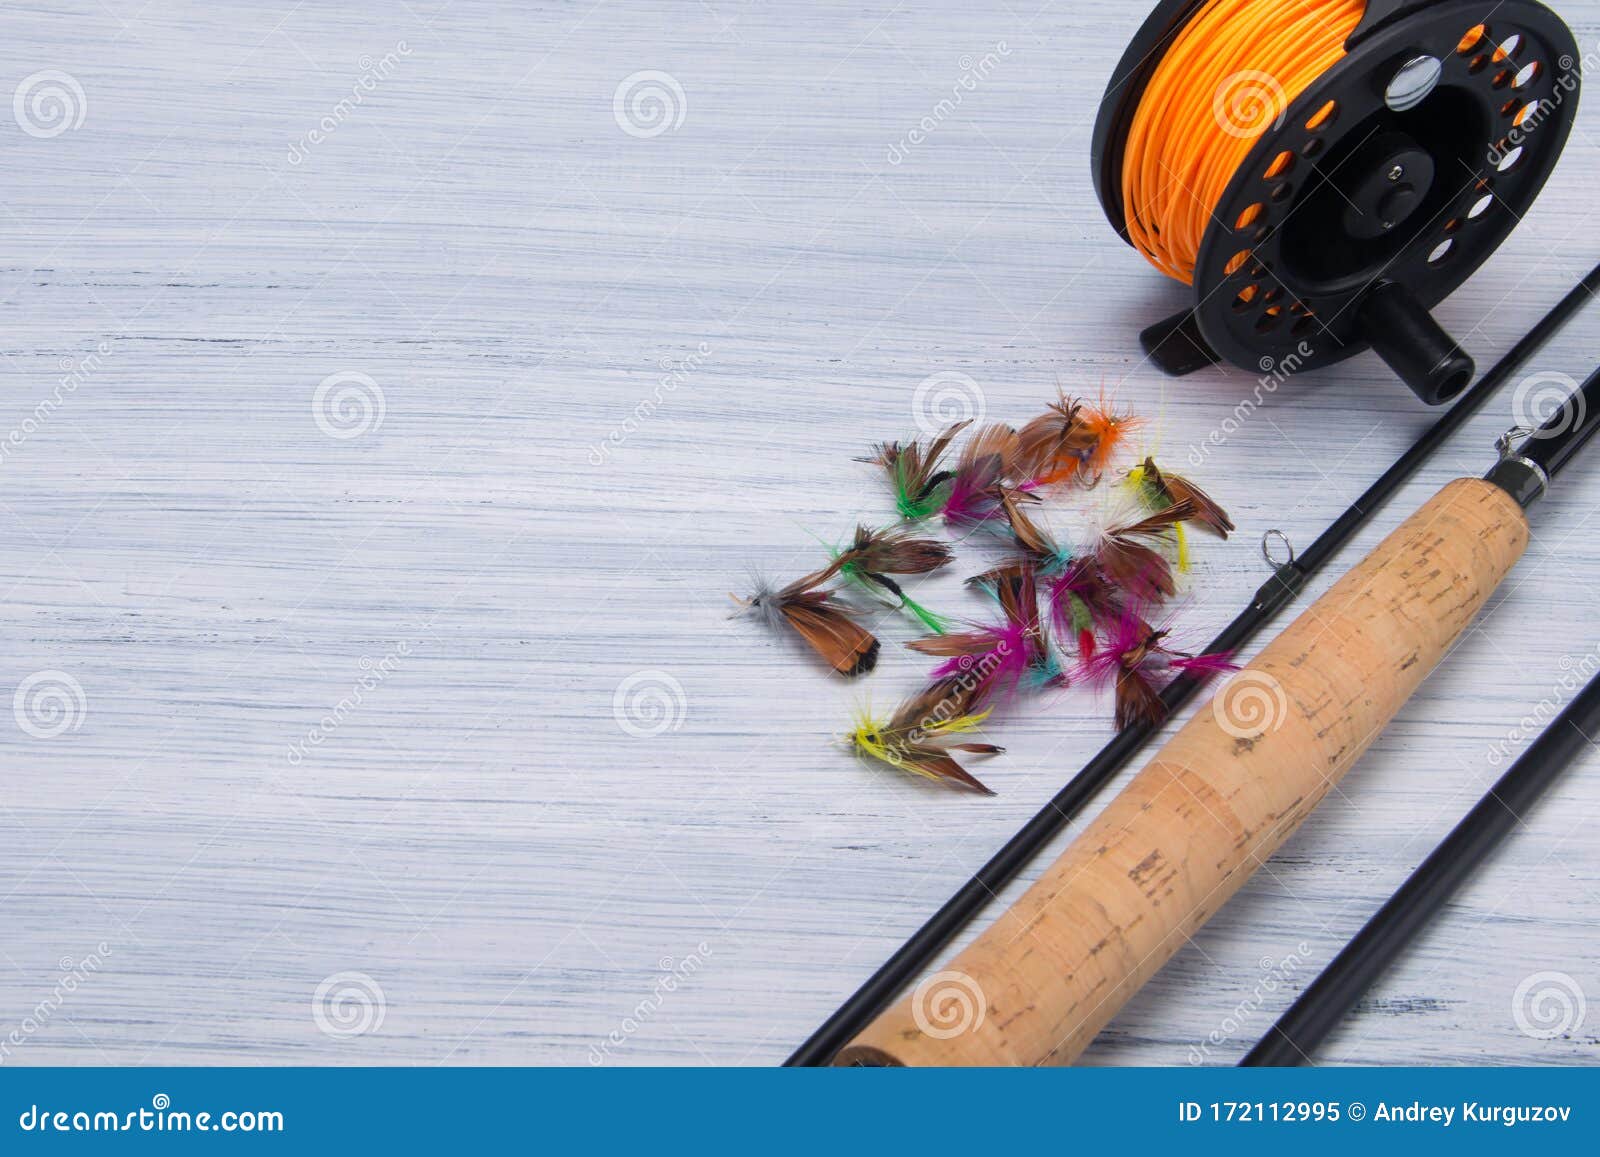 Close-up of a Wooden Handle from a Fishing Rod, a Reel with a Fishing Line  and a Bait with a Hook, for Catching Fish, on a Light Stock Image - Image of